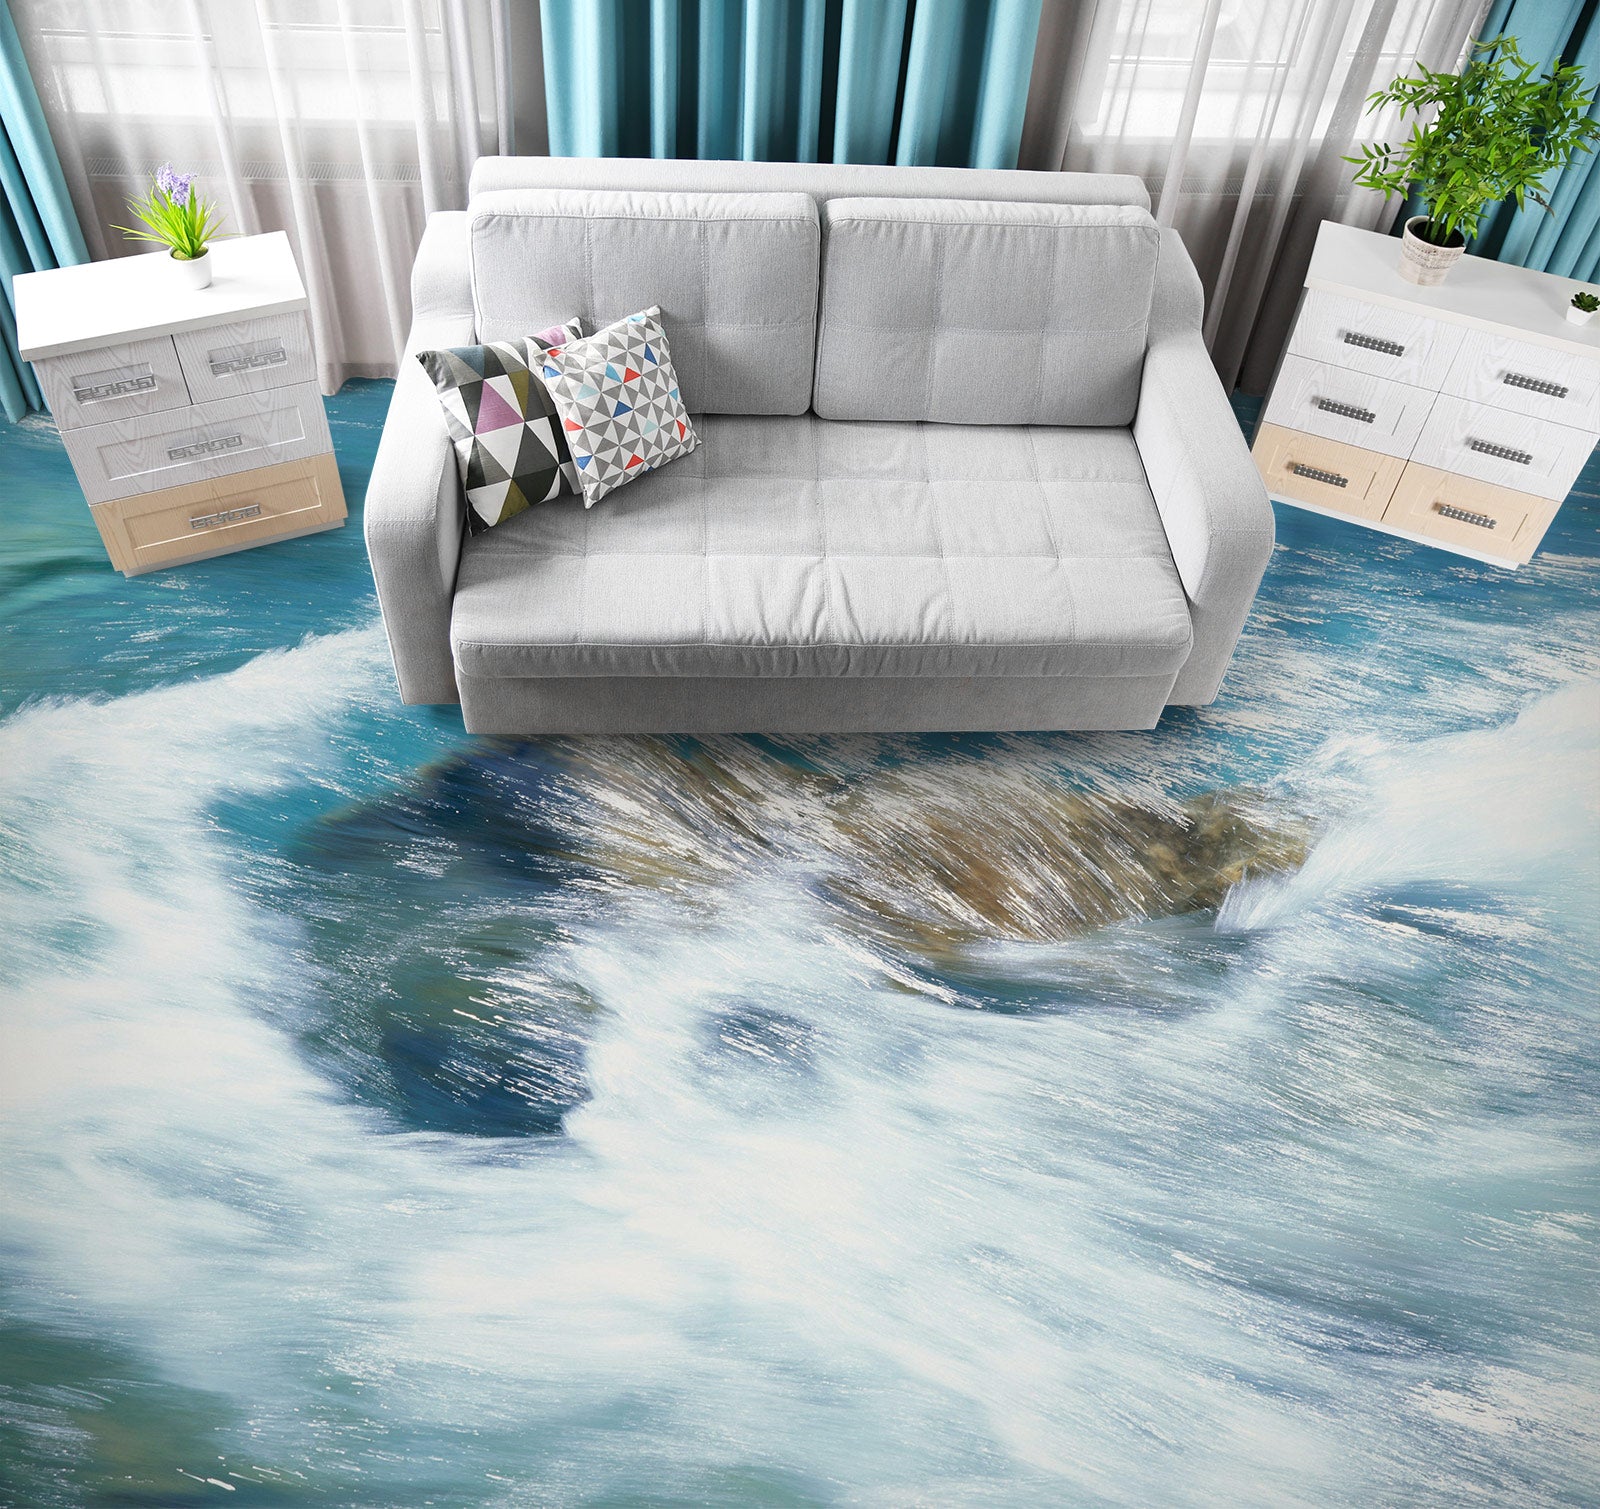 3D Sea Of Time 1381 Floor Mural  Wallpaper Murals Self-Adhesive Removable Print Epoxy